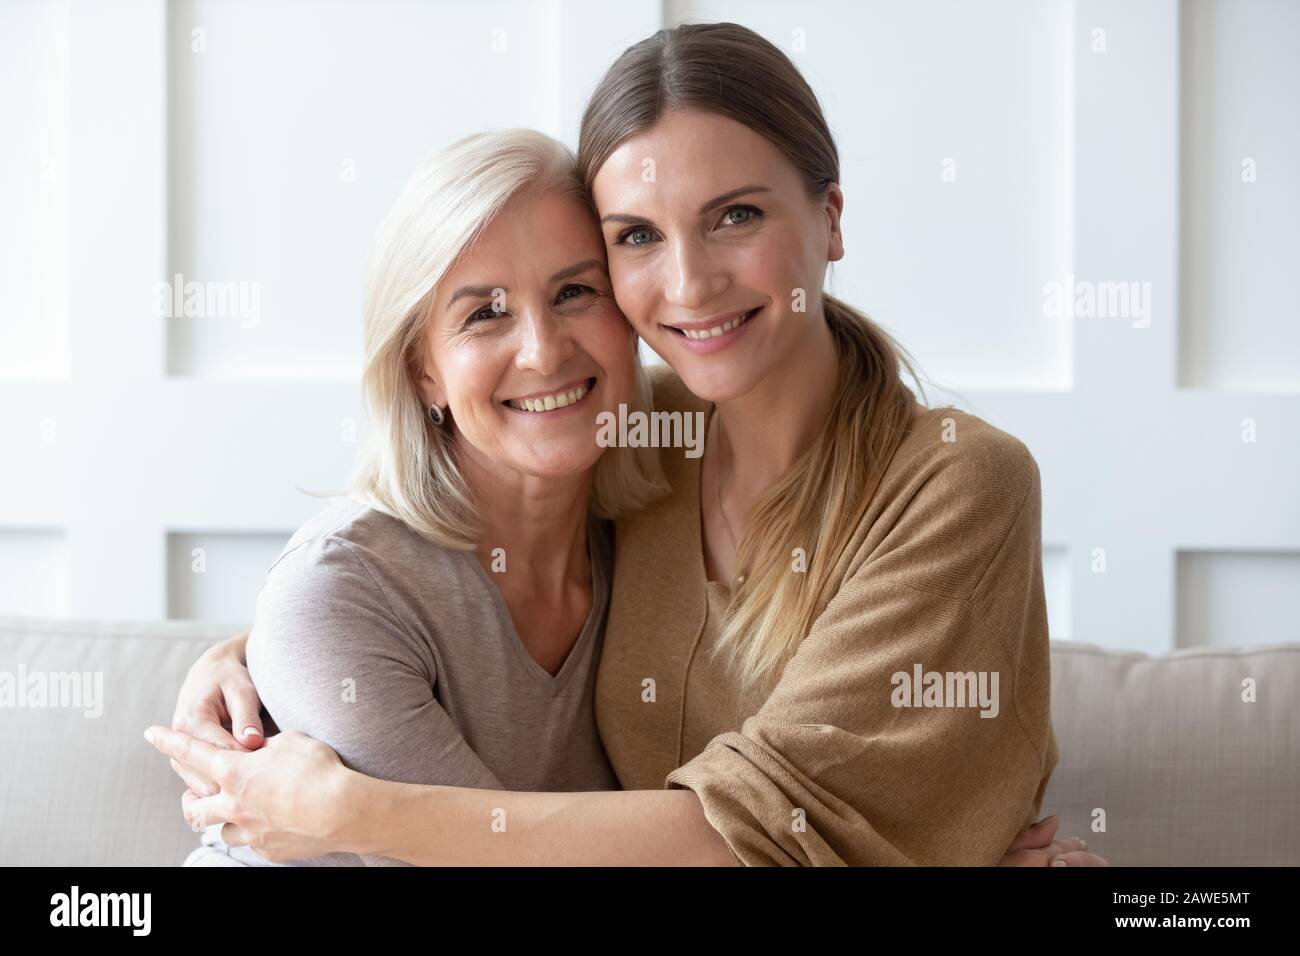 Headshot portrait of mature mom and adult daughter posing Stock Photo